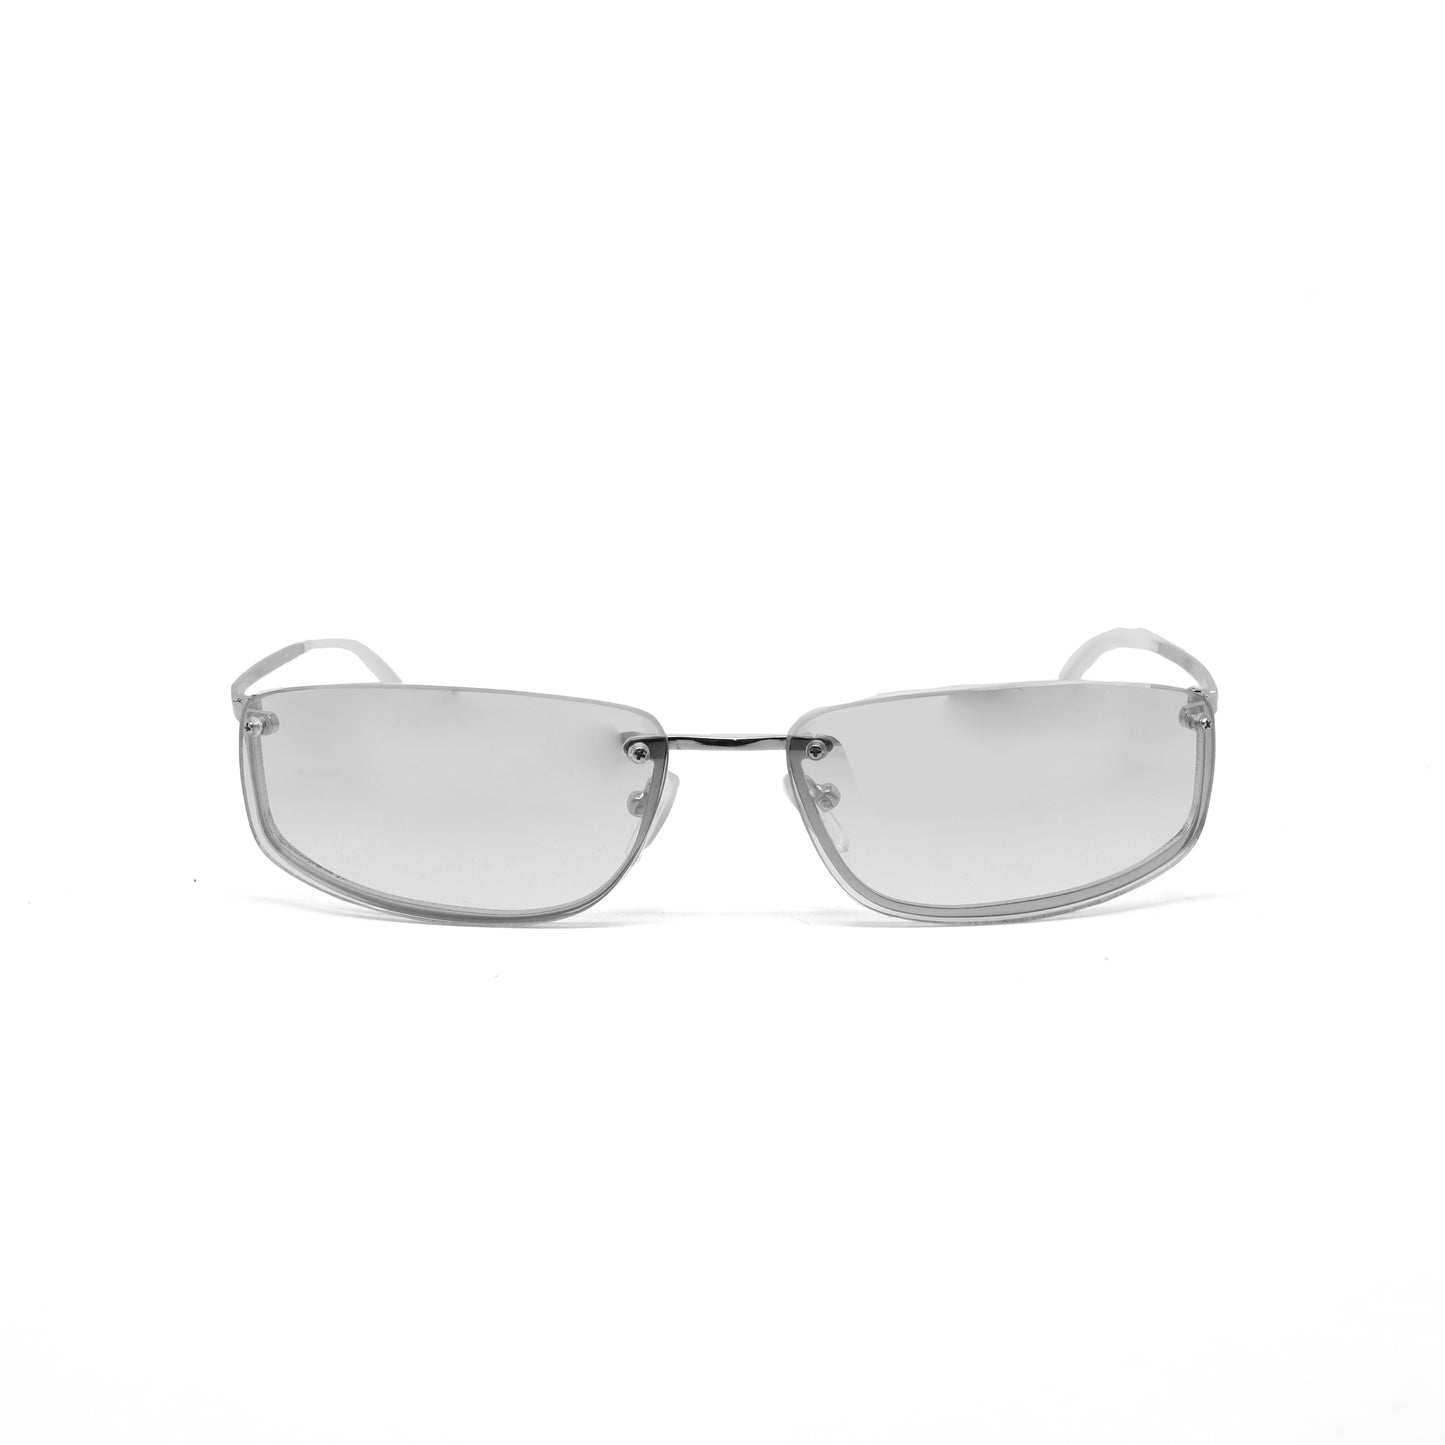 Deluxe Late 90s Vintage Metal Frameless Sunglasses - Clear